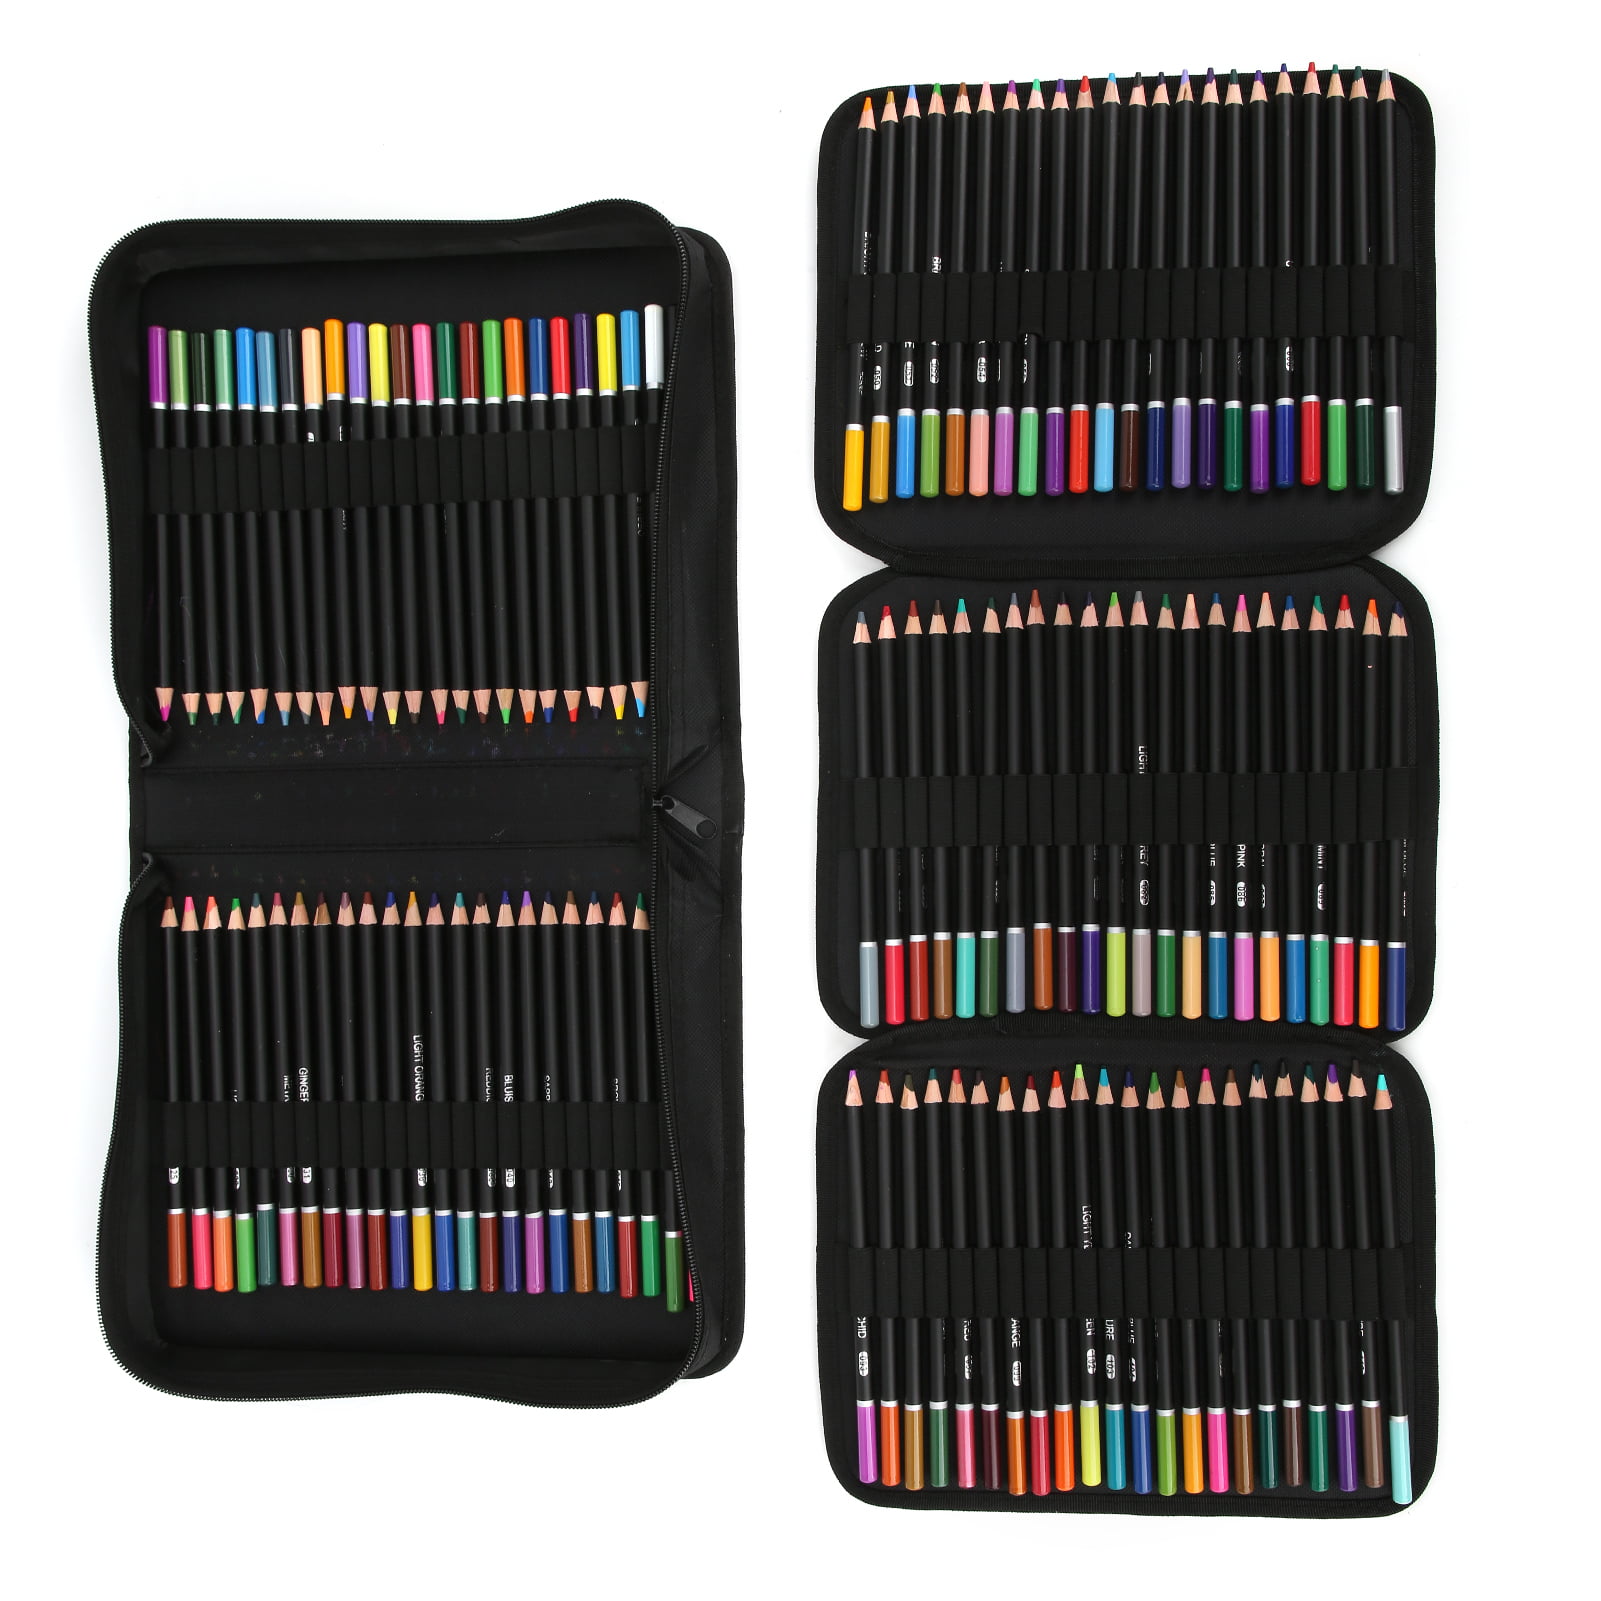 72 Colored Pencils Set,Artist Color Pencil Kit for Adult Kids Teens Coloring  DrawingSoft Core,Oil Based Coloured Pencil,Coloring Book,Sketchpad,Sharpener  in Pencil Case 